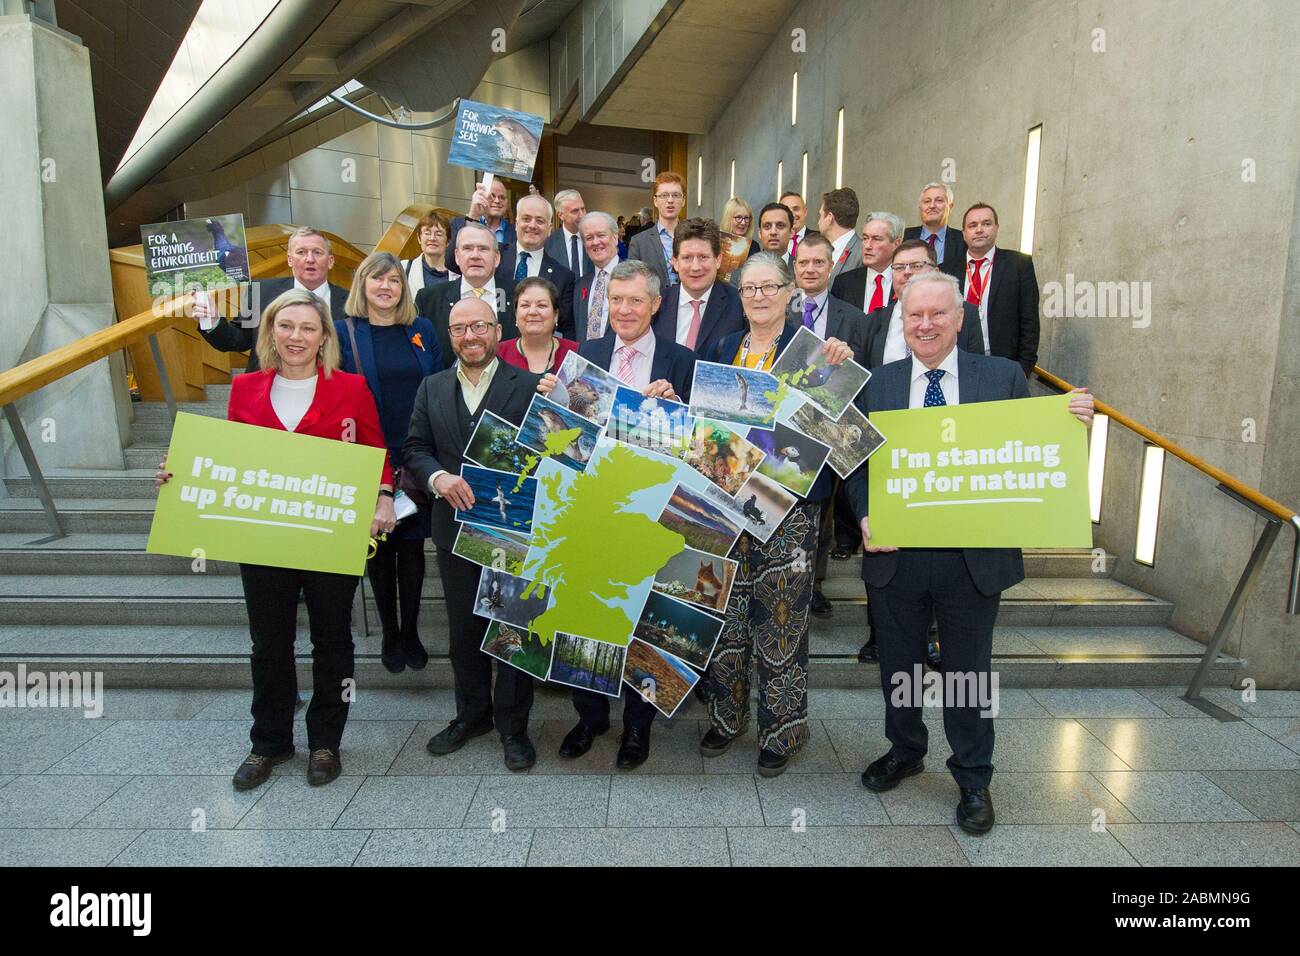 Edinburgh, UK. 28th Nov, 2019. Pictured: Group photocall for the Scottish Environment Link. Party Leaders: (2nd left front row) Patrick Harvie MSP - Co Leader the Scottish Green Party; (centre front row) Willie Rennie MSP - Leader of the Scottish Liberal Democrat Party. Scenes from the weekly session of First Ministers Questions in the Scottish Parliament. Credit: Colin Fisher/Alamy Live News Stock Photo